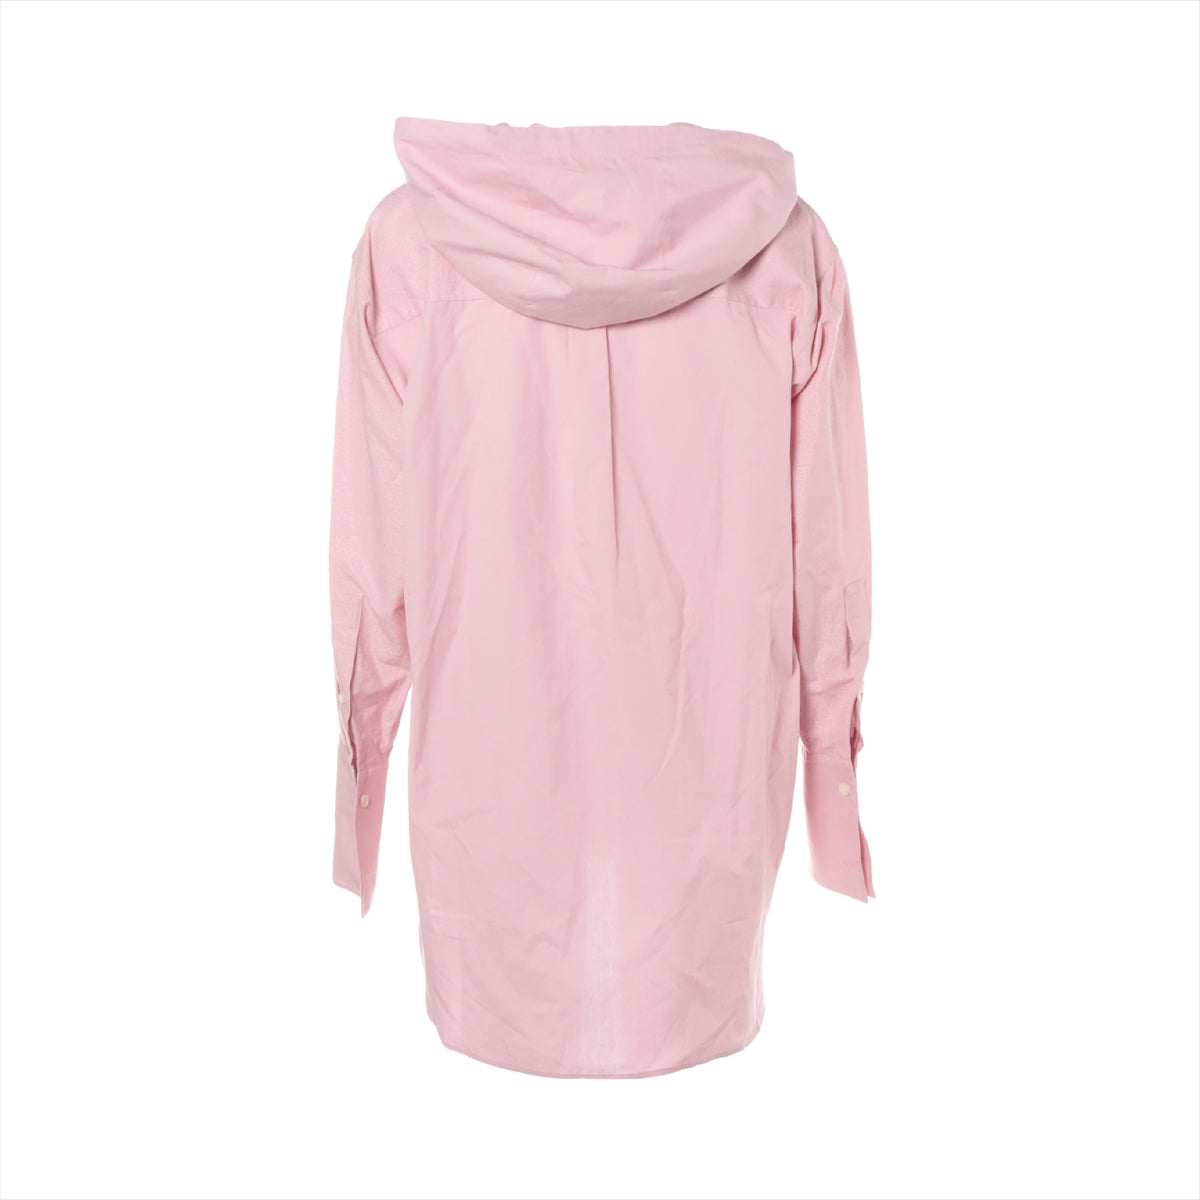 Loewe Anagram Cotton Shirt 32 Ladies' Pink  Hooded Logo embroidery overall pattern S540Y06X53